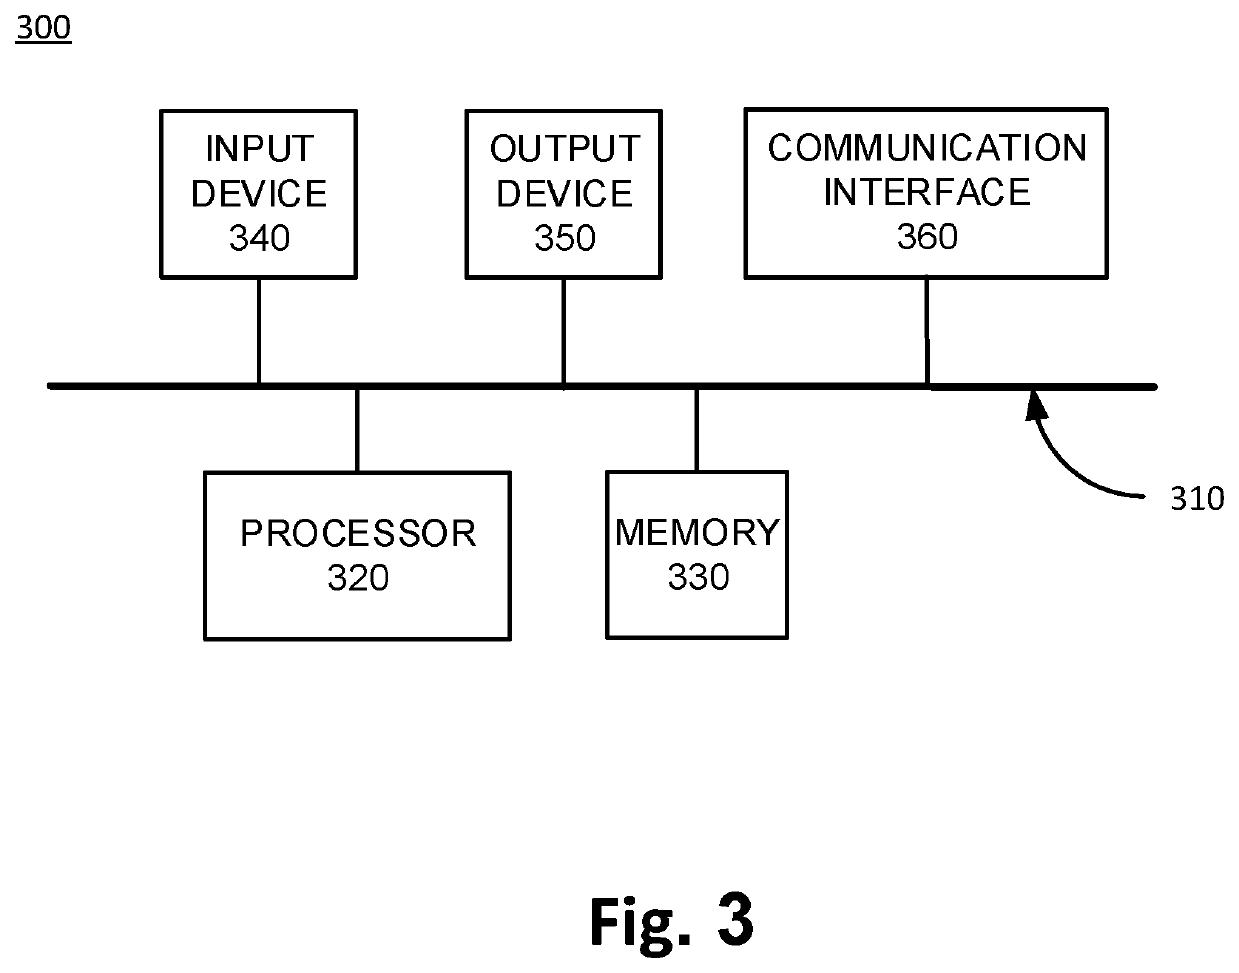 Method and apparatus for summarization of dialogs